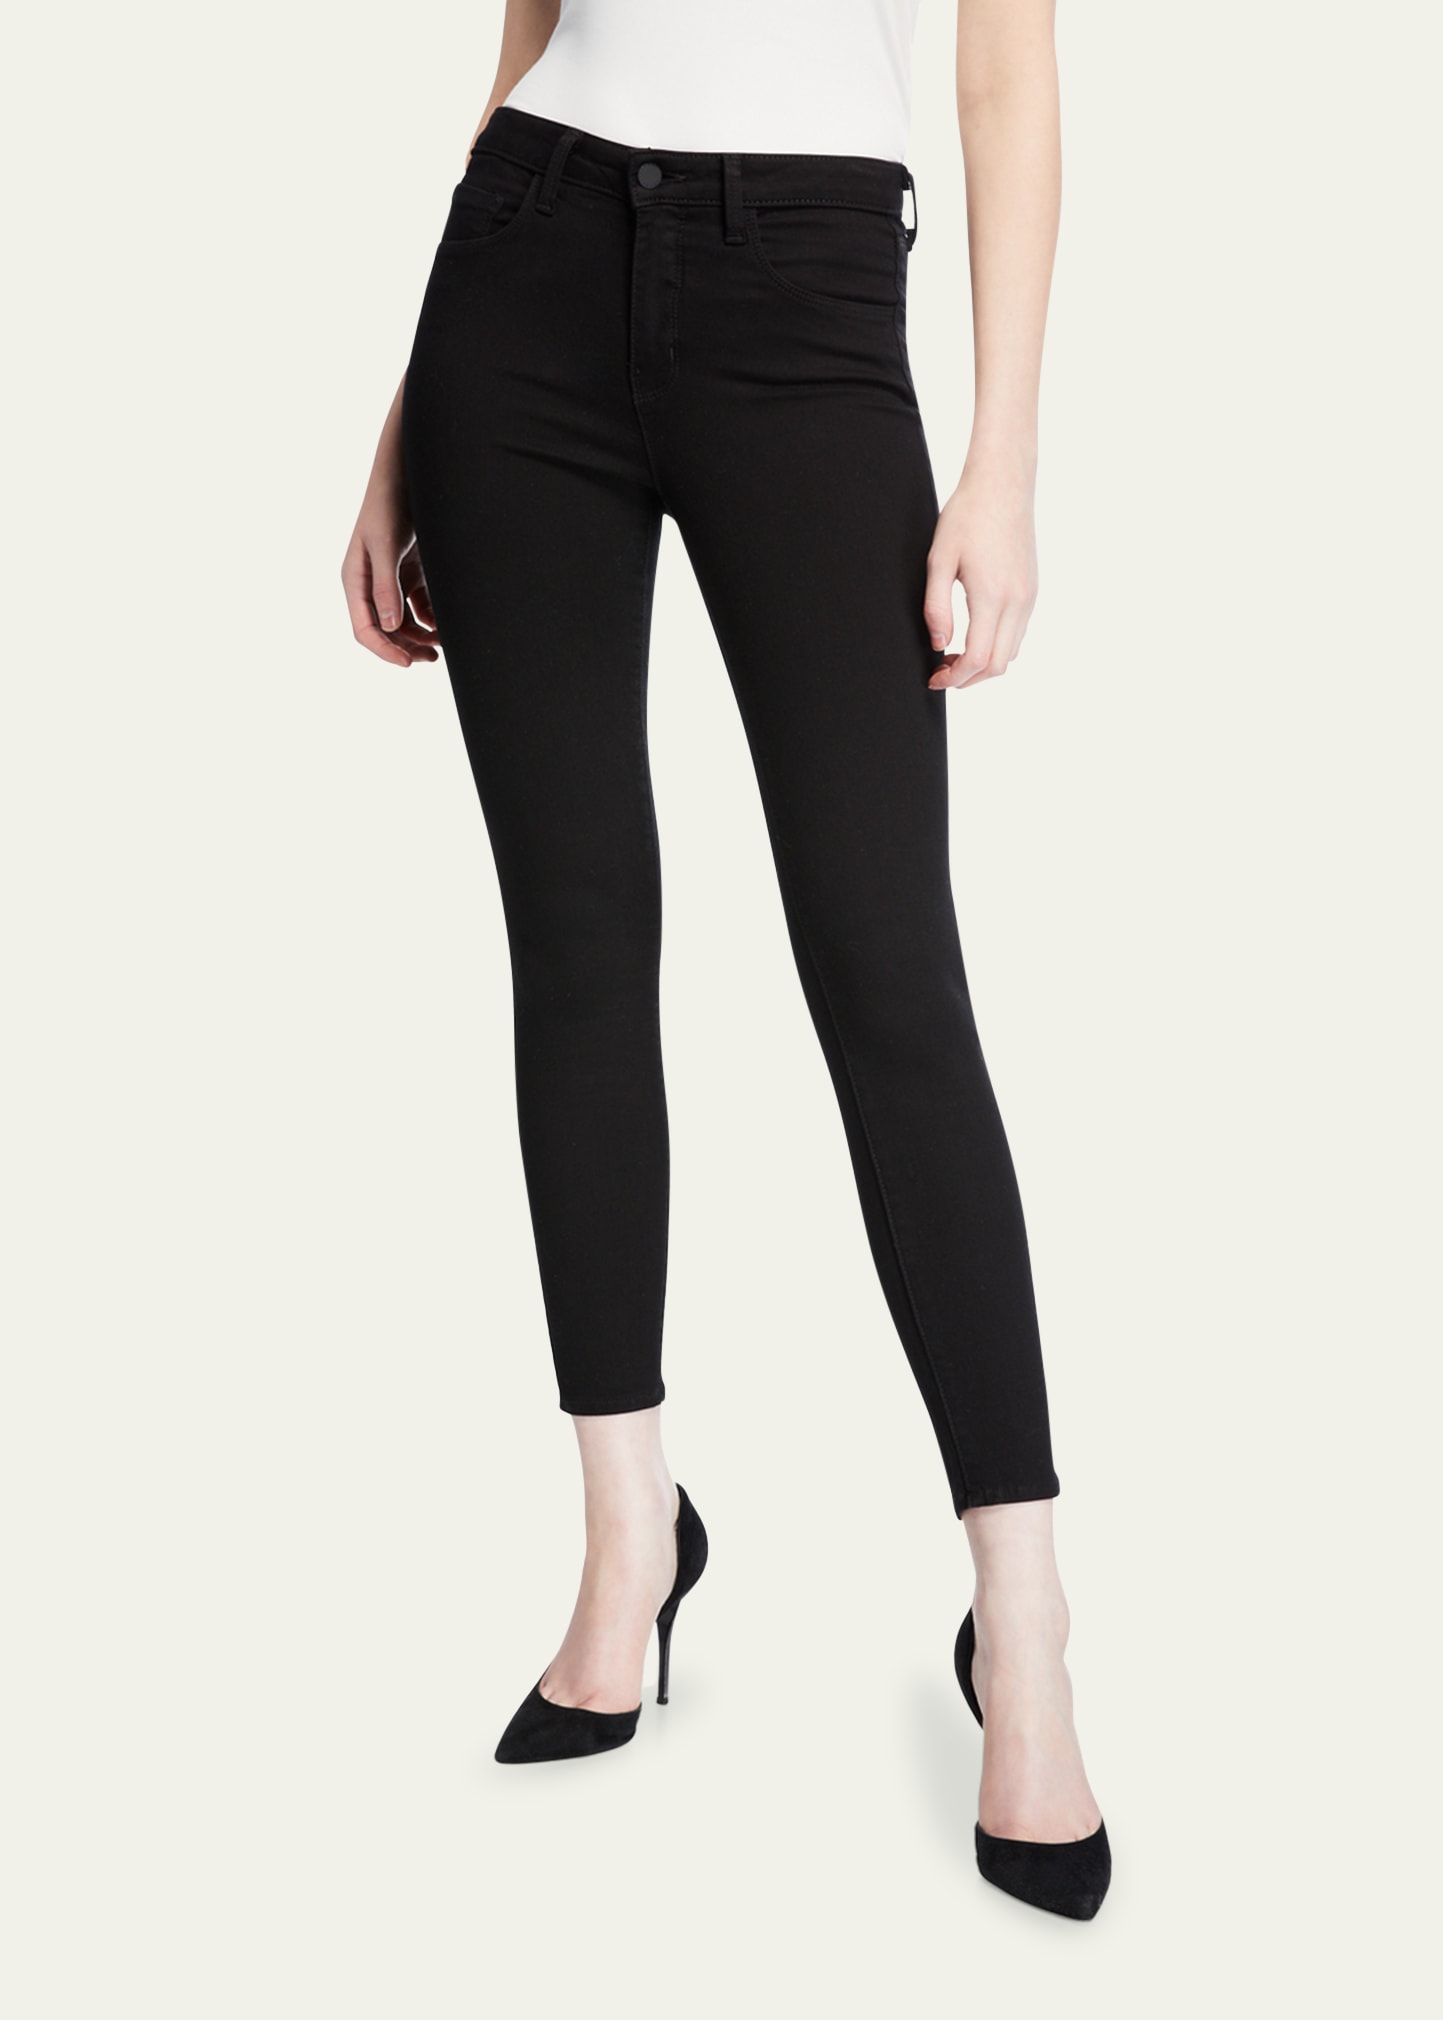 L'Agence Margot High-Rise Skinny Ankle Jeans